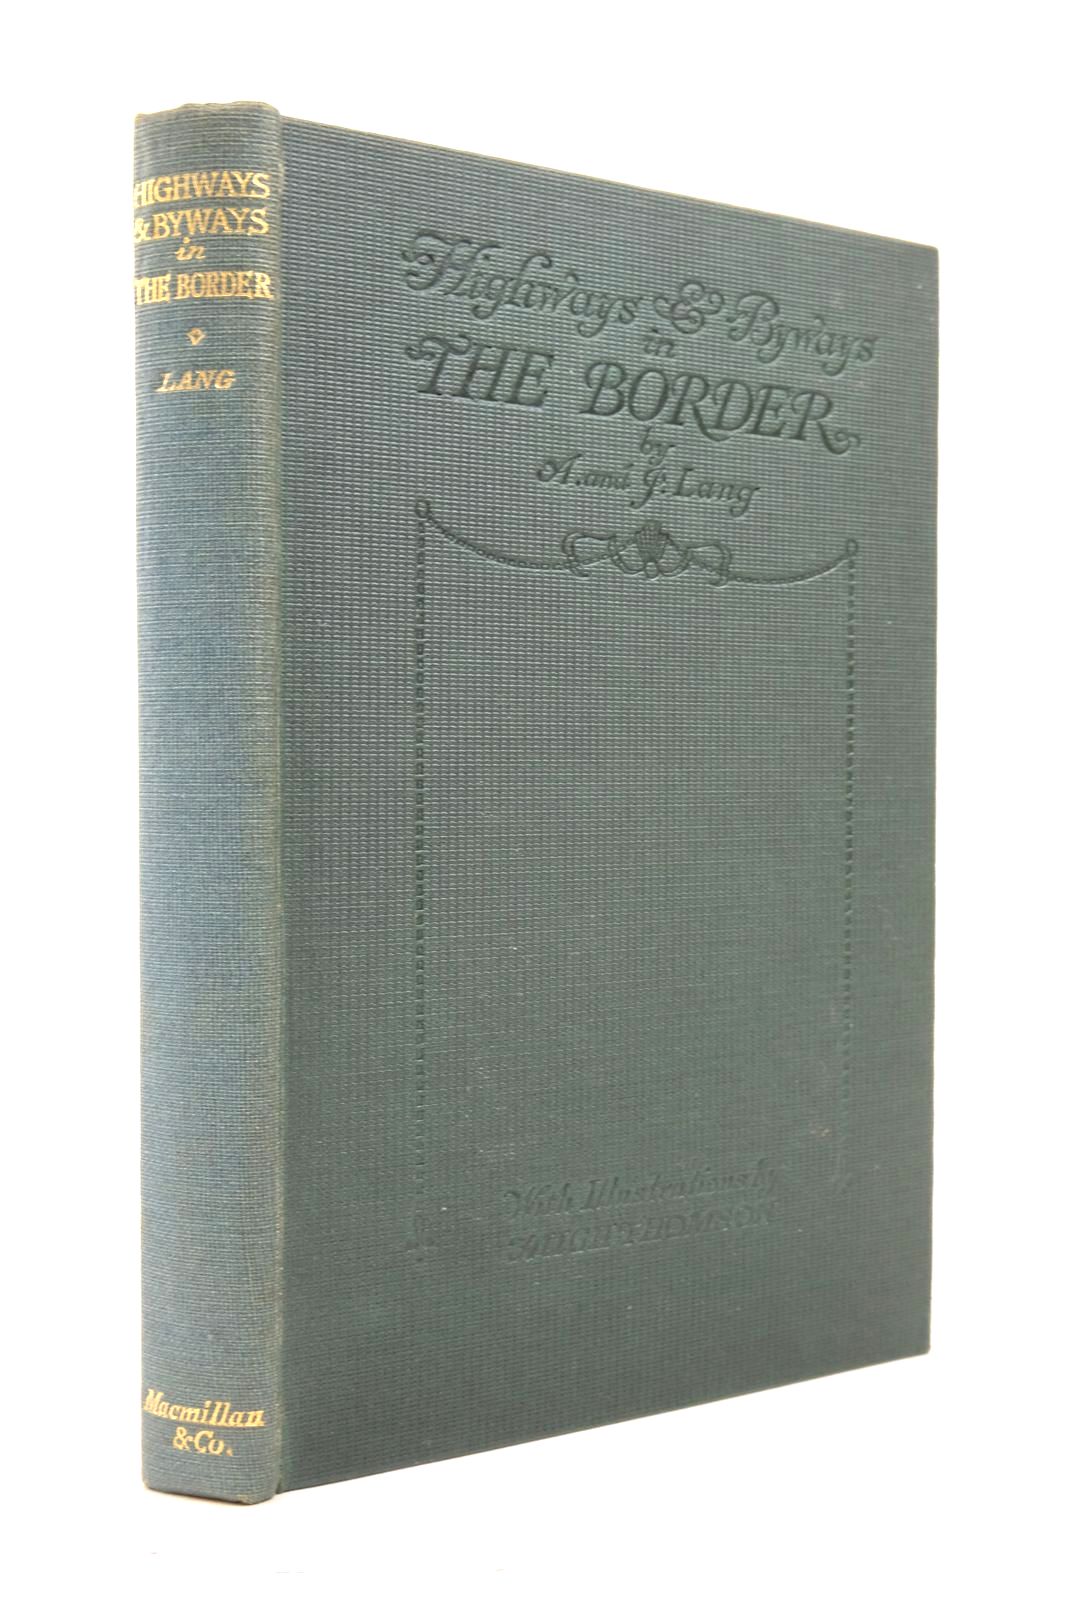 Photo of HIGHWAYS AND BYWAYS IN THE BORDER written by Lang, Andrew
Lang, John illustrated by Thomson, Hugh published by Macmillan & Co. Ltd. (STOCK CODE: 2137610)  for sale by Stella & Rose's Books